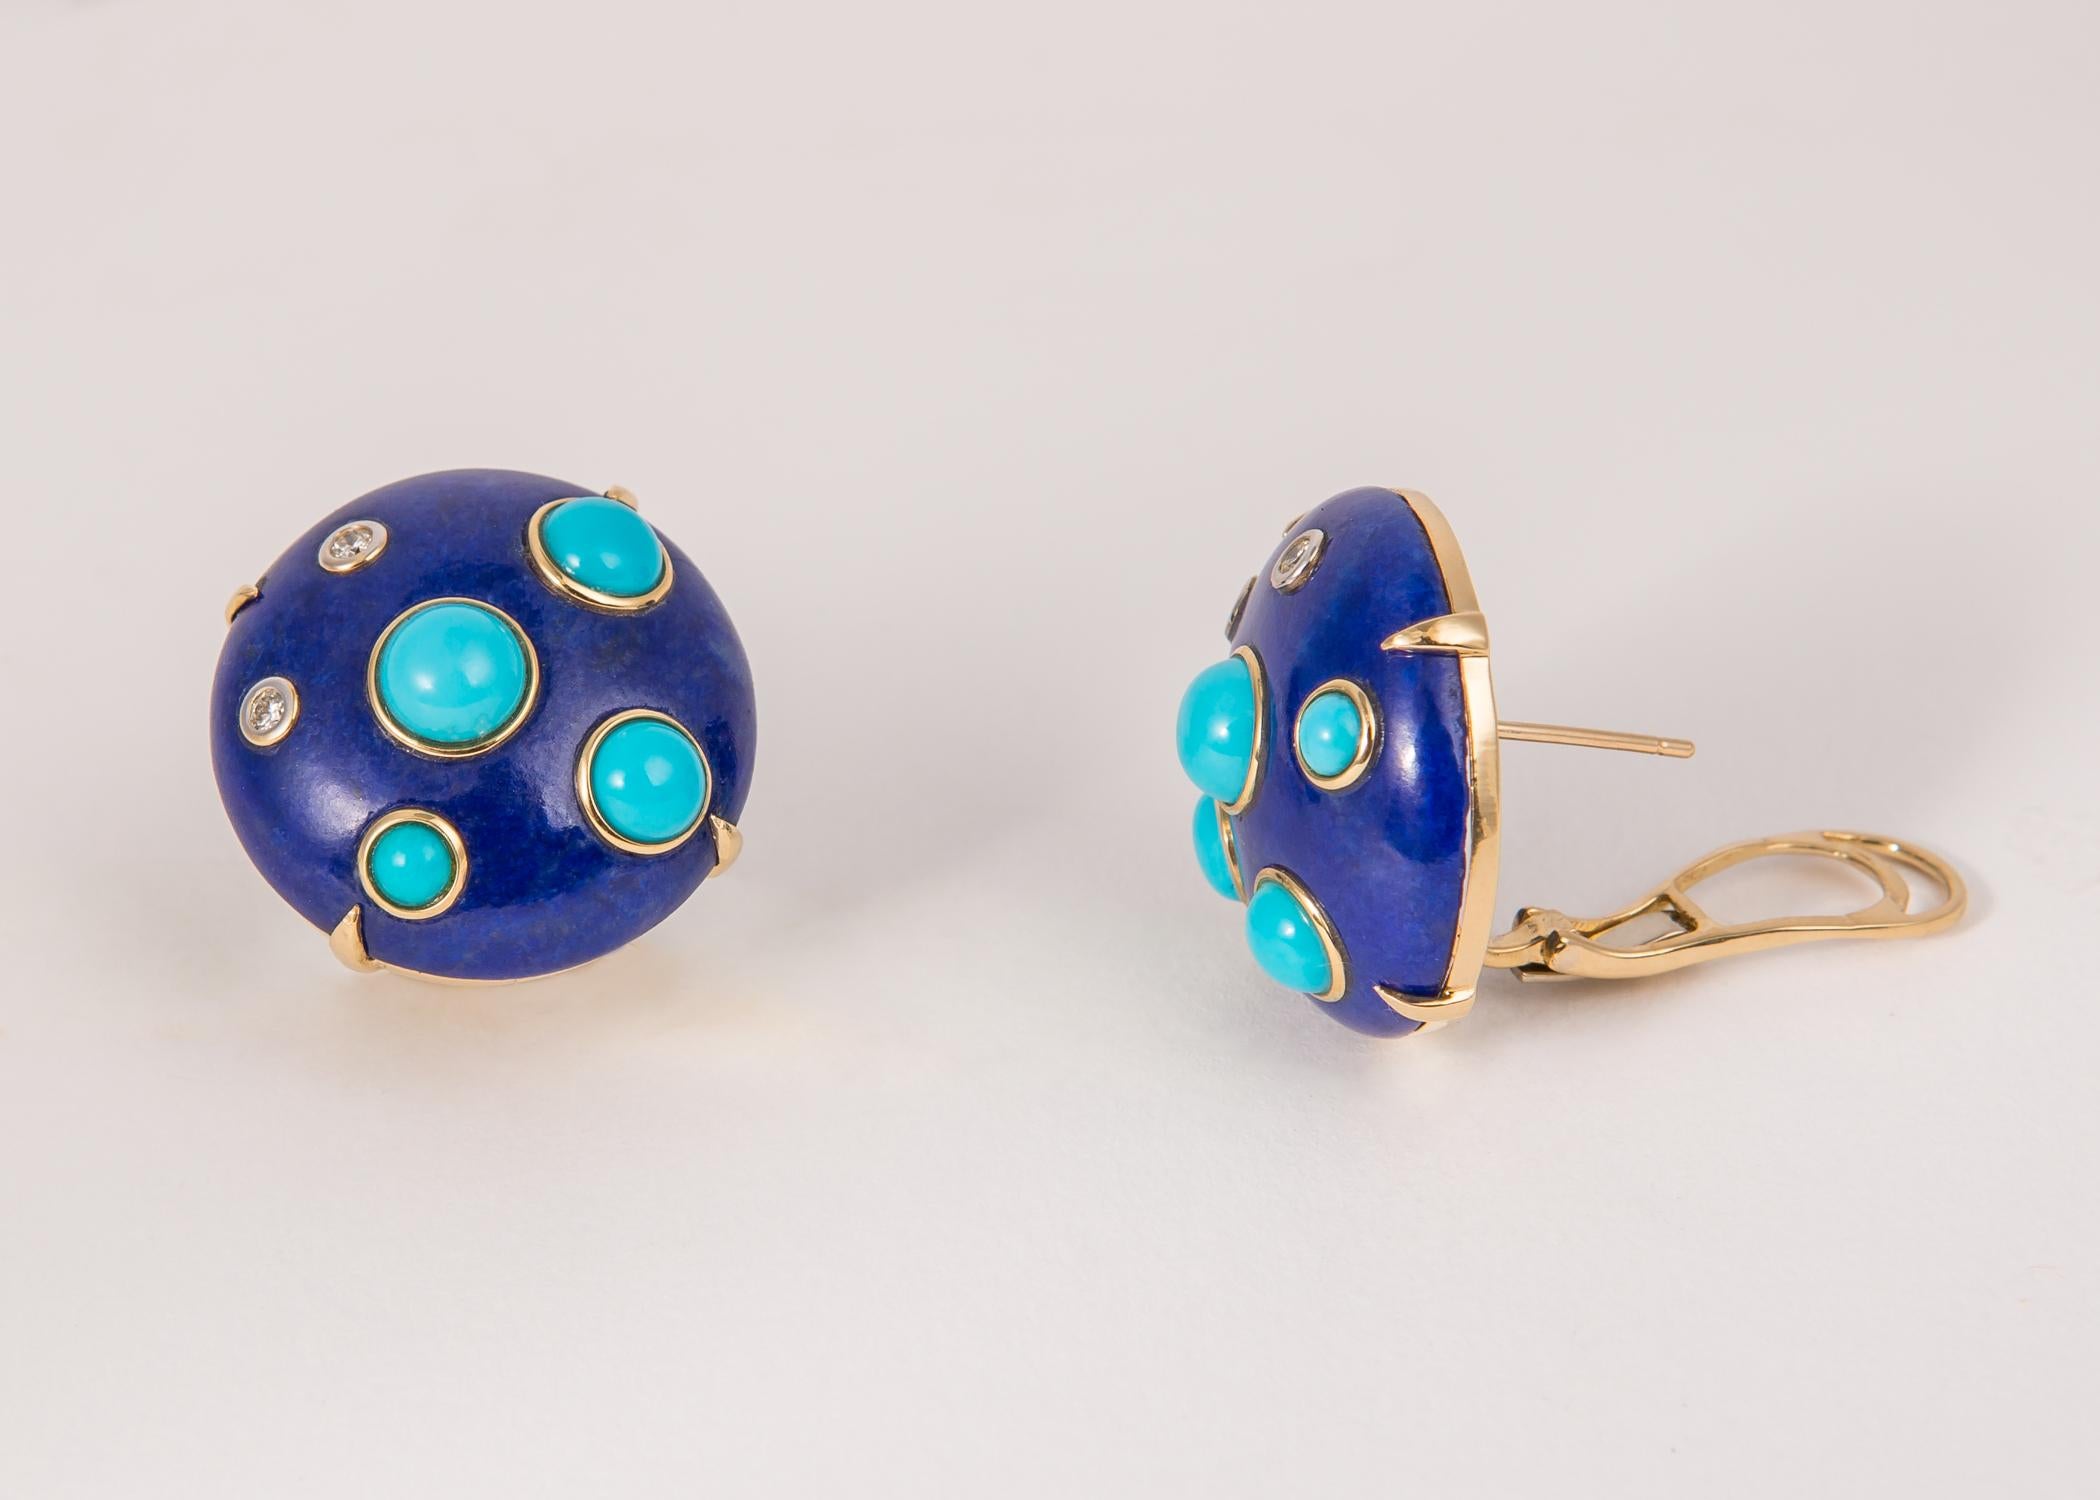 Rich lapis is paired with turquoise and accented with brilliant cut diamonds. A fun playful design. 7/8's of an inch in size.